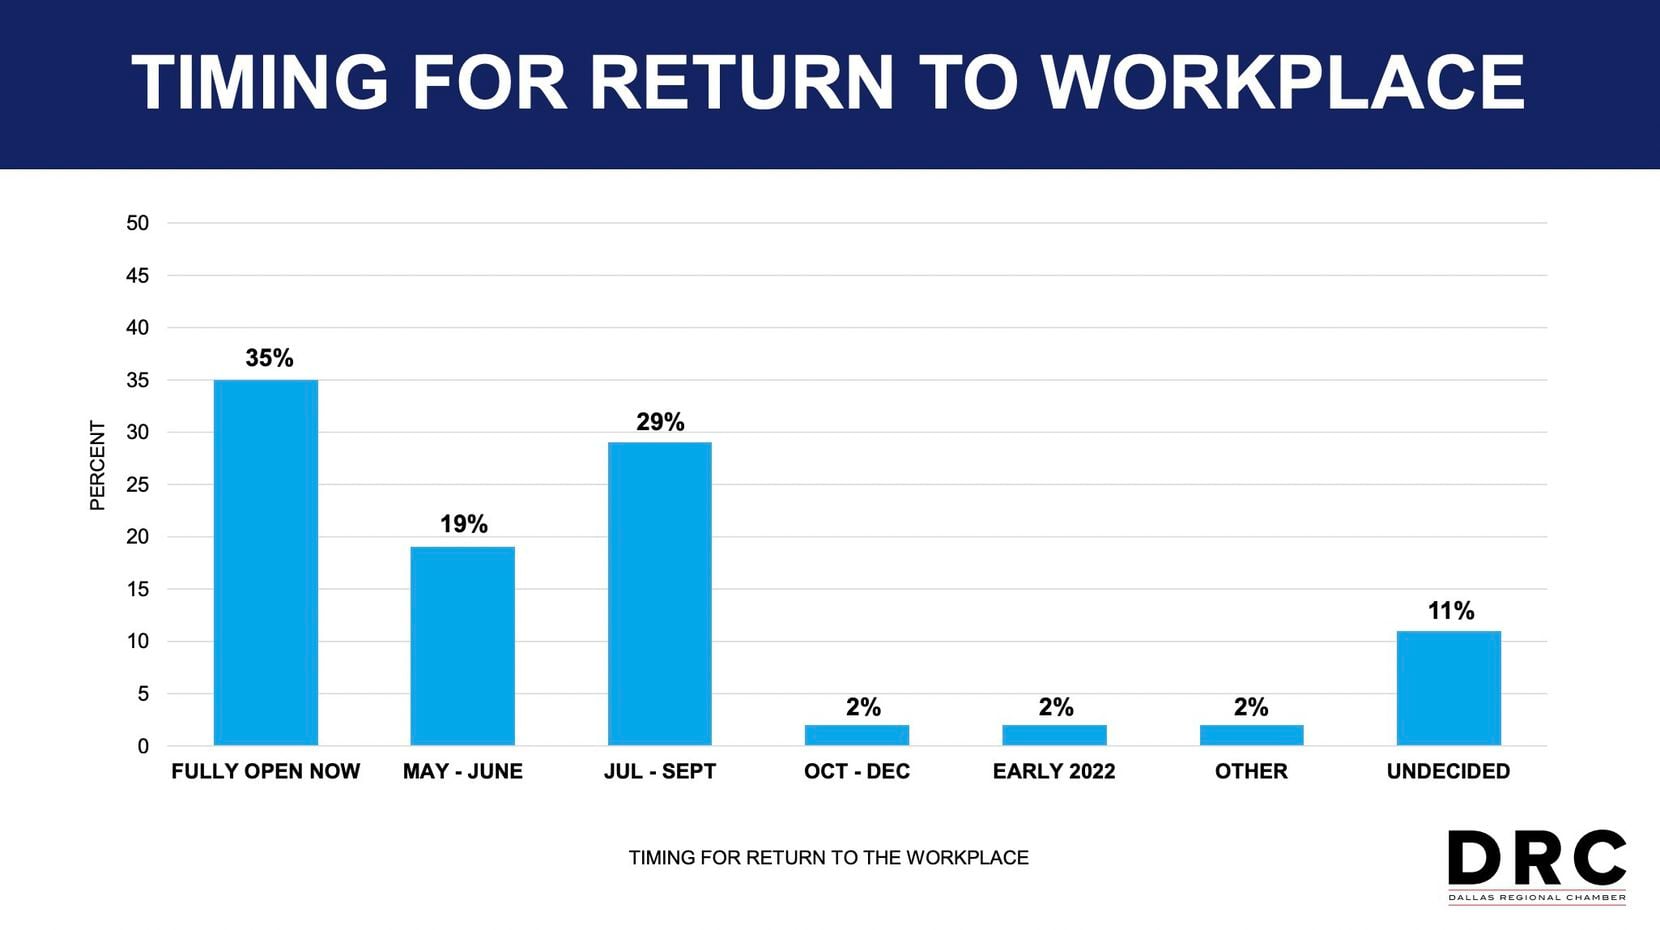 Dallas Regional Chamber 2021 Future of Work survey results